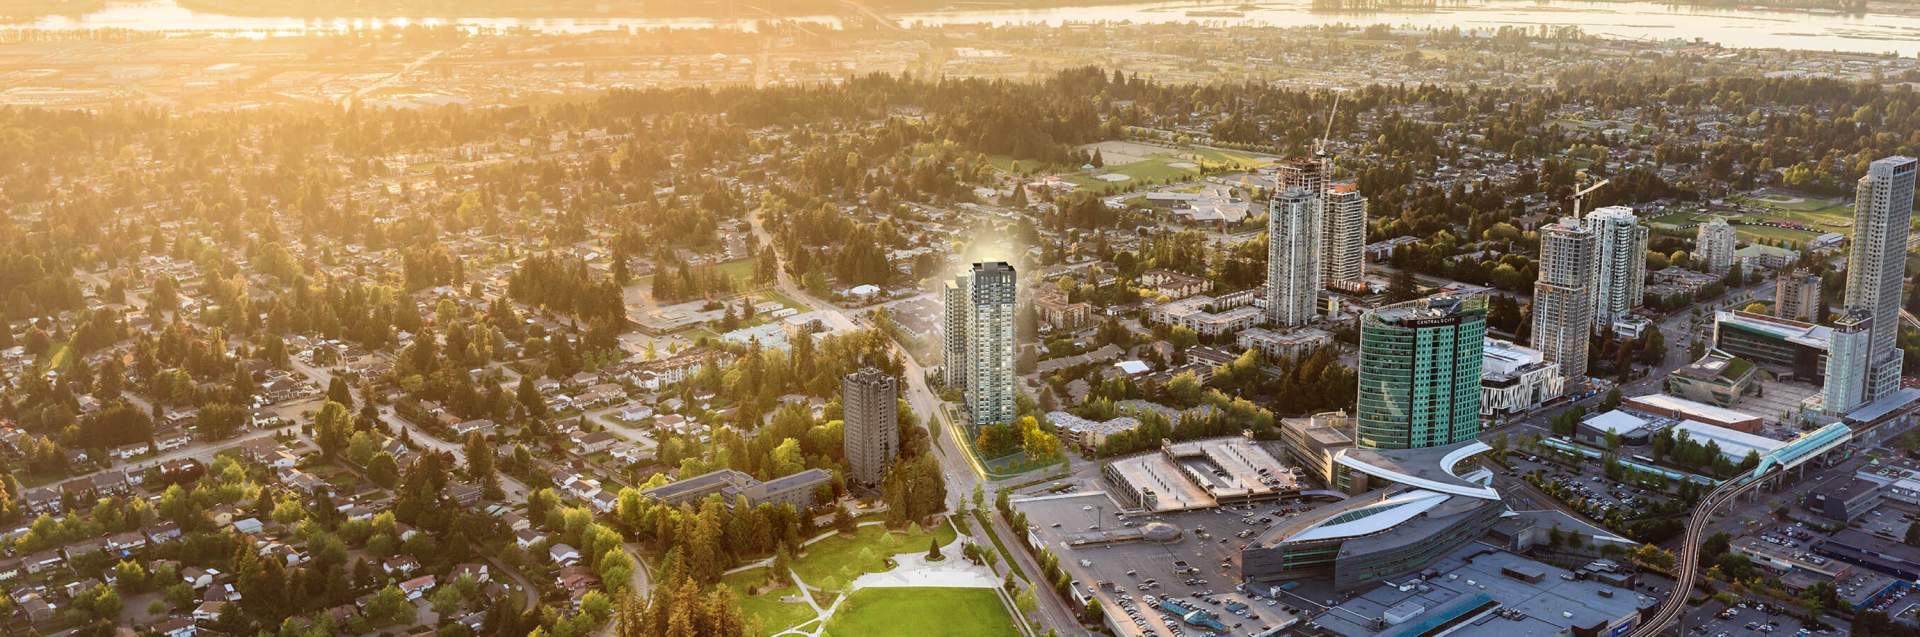 1-, 2-, and 3-bedroom Surrey City Centre parkside residences and townhomes.